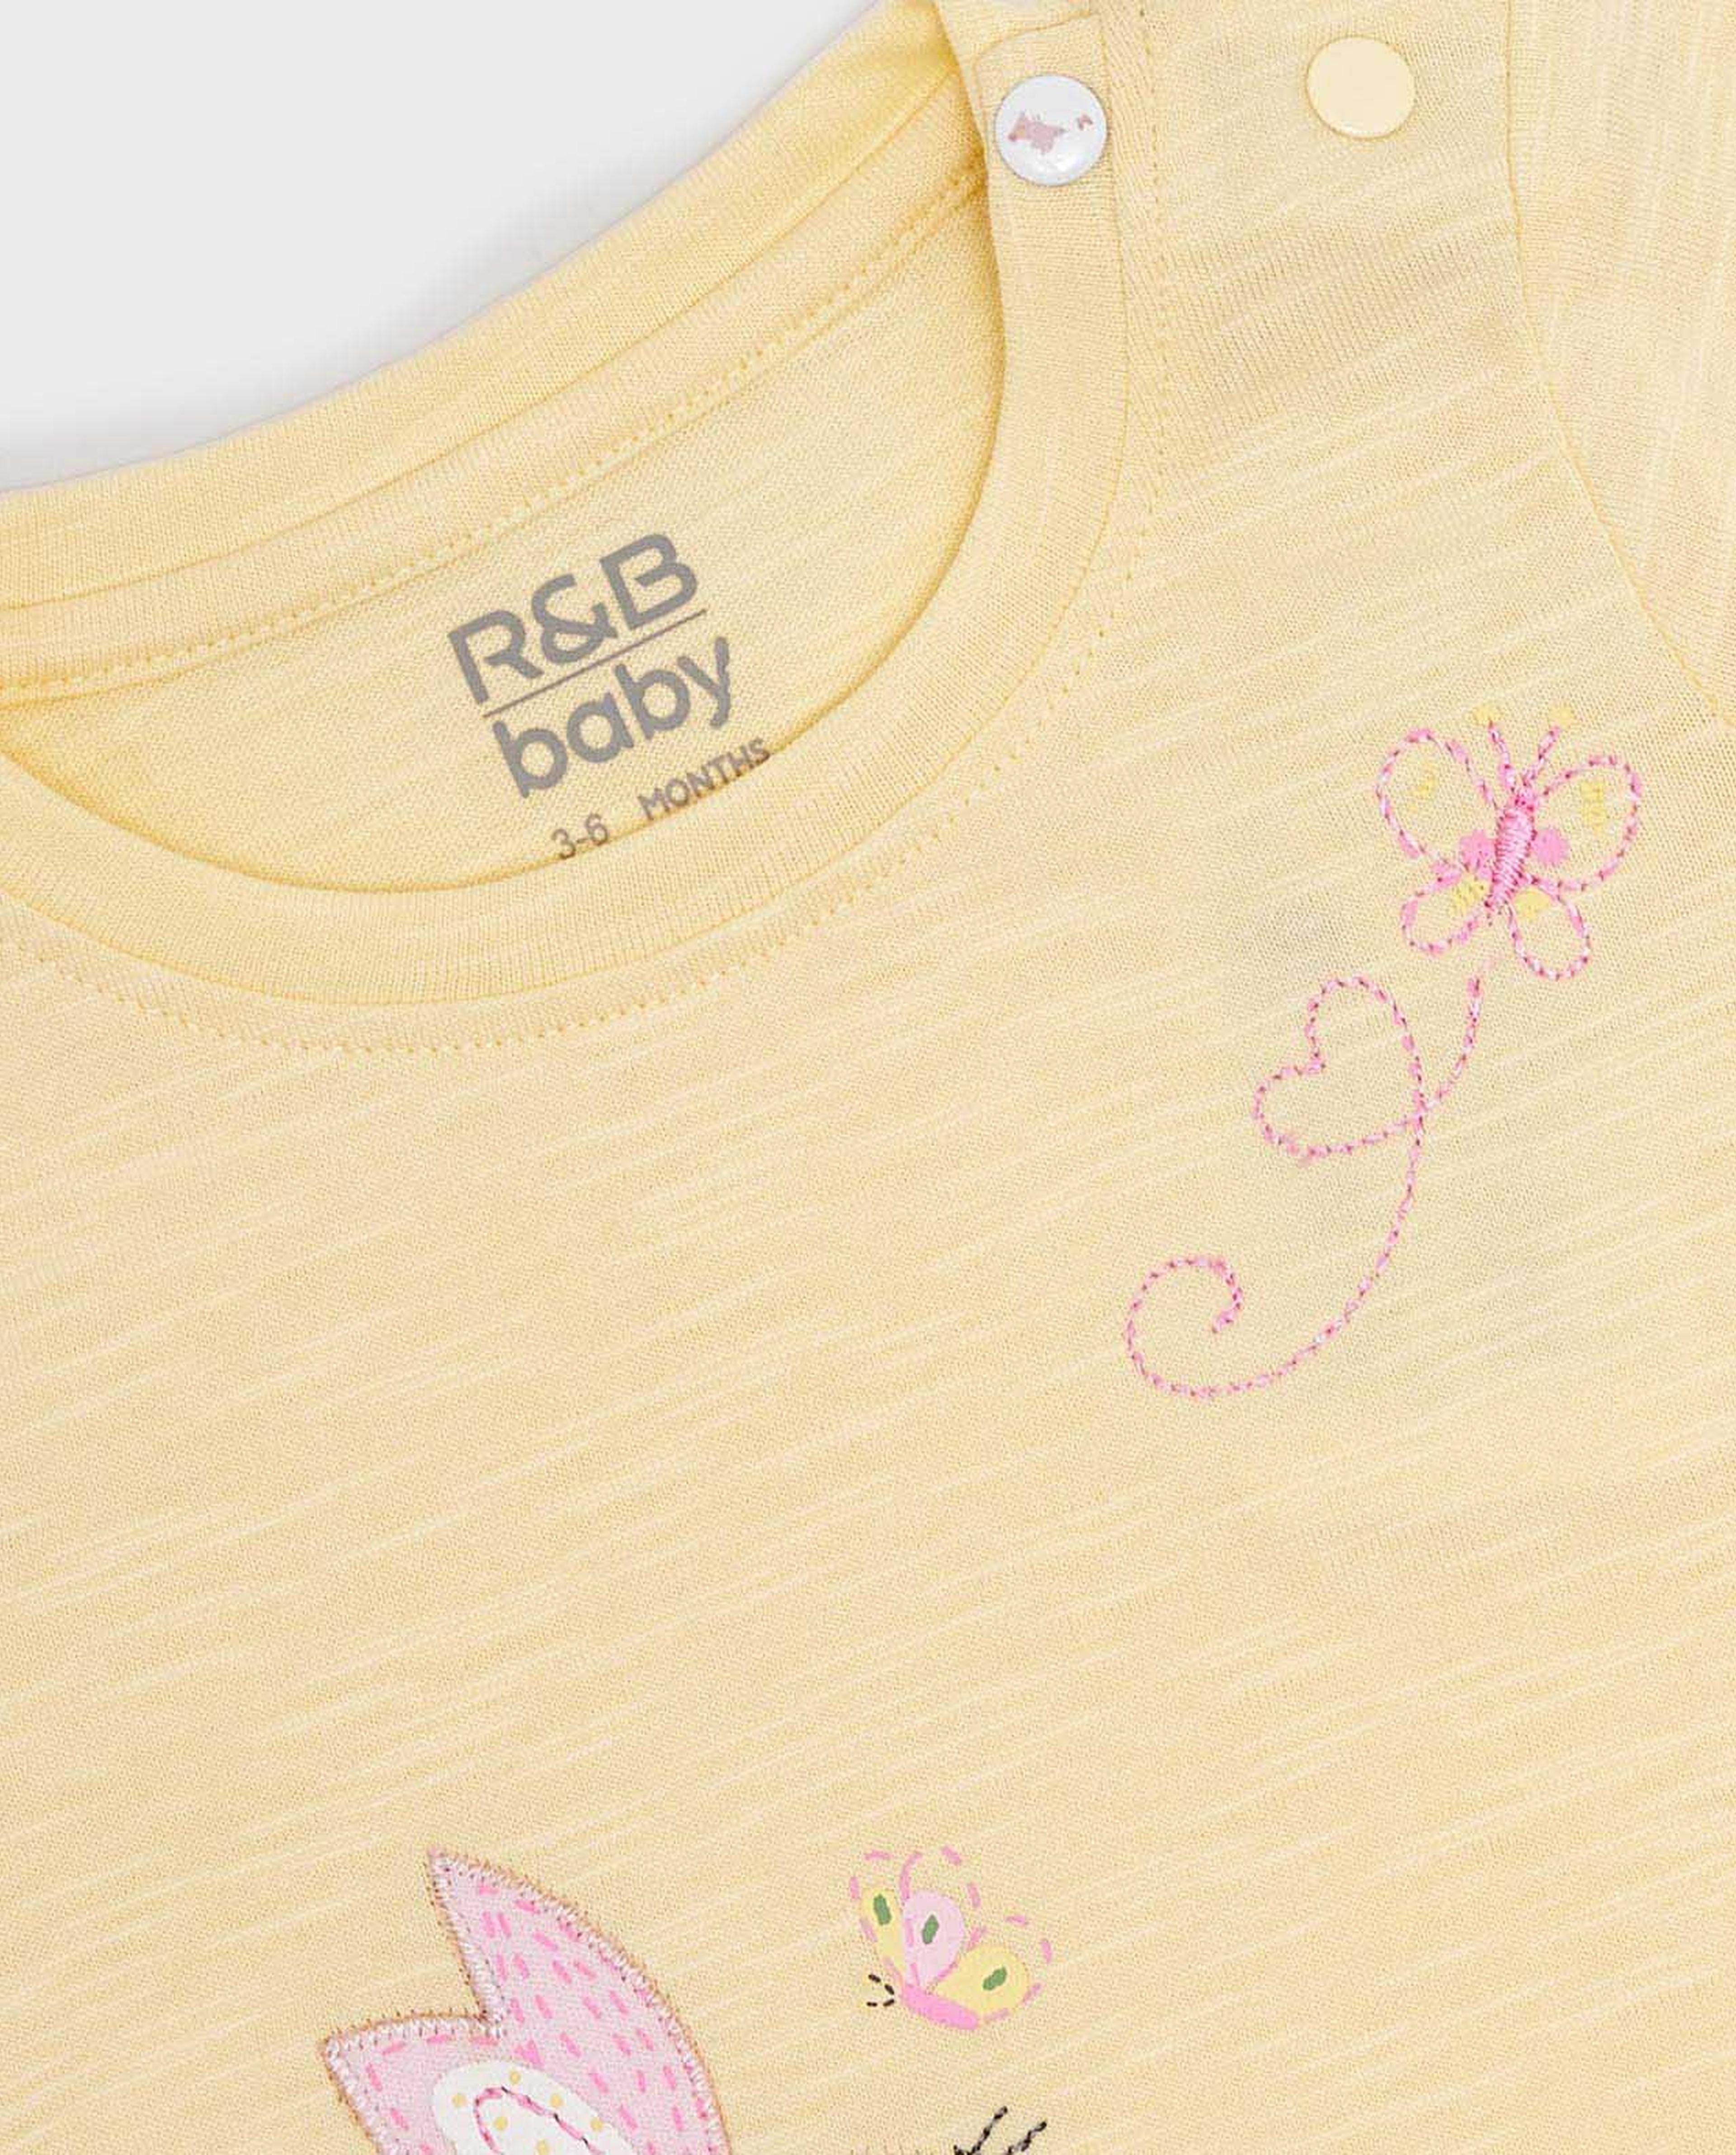 Applique Detail Top with Crew Neck and Short Sleeves